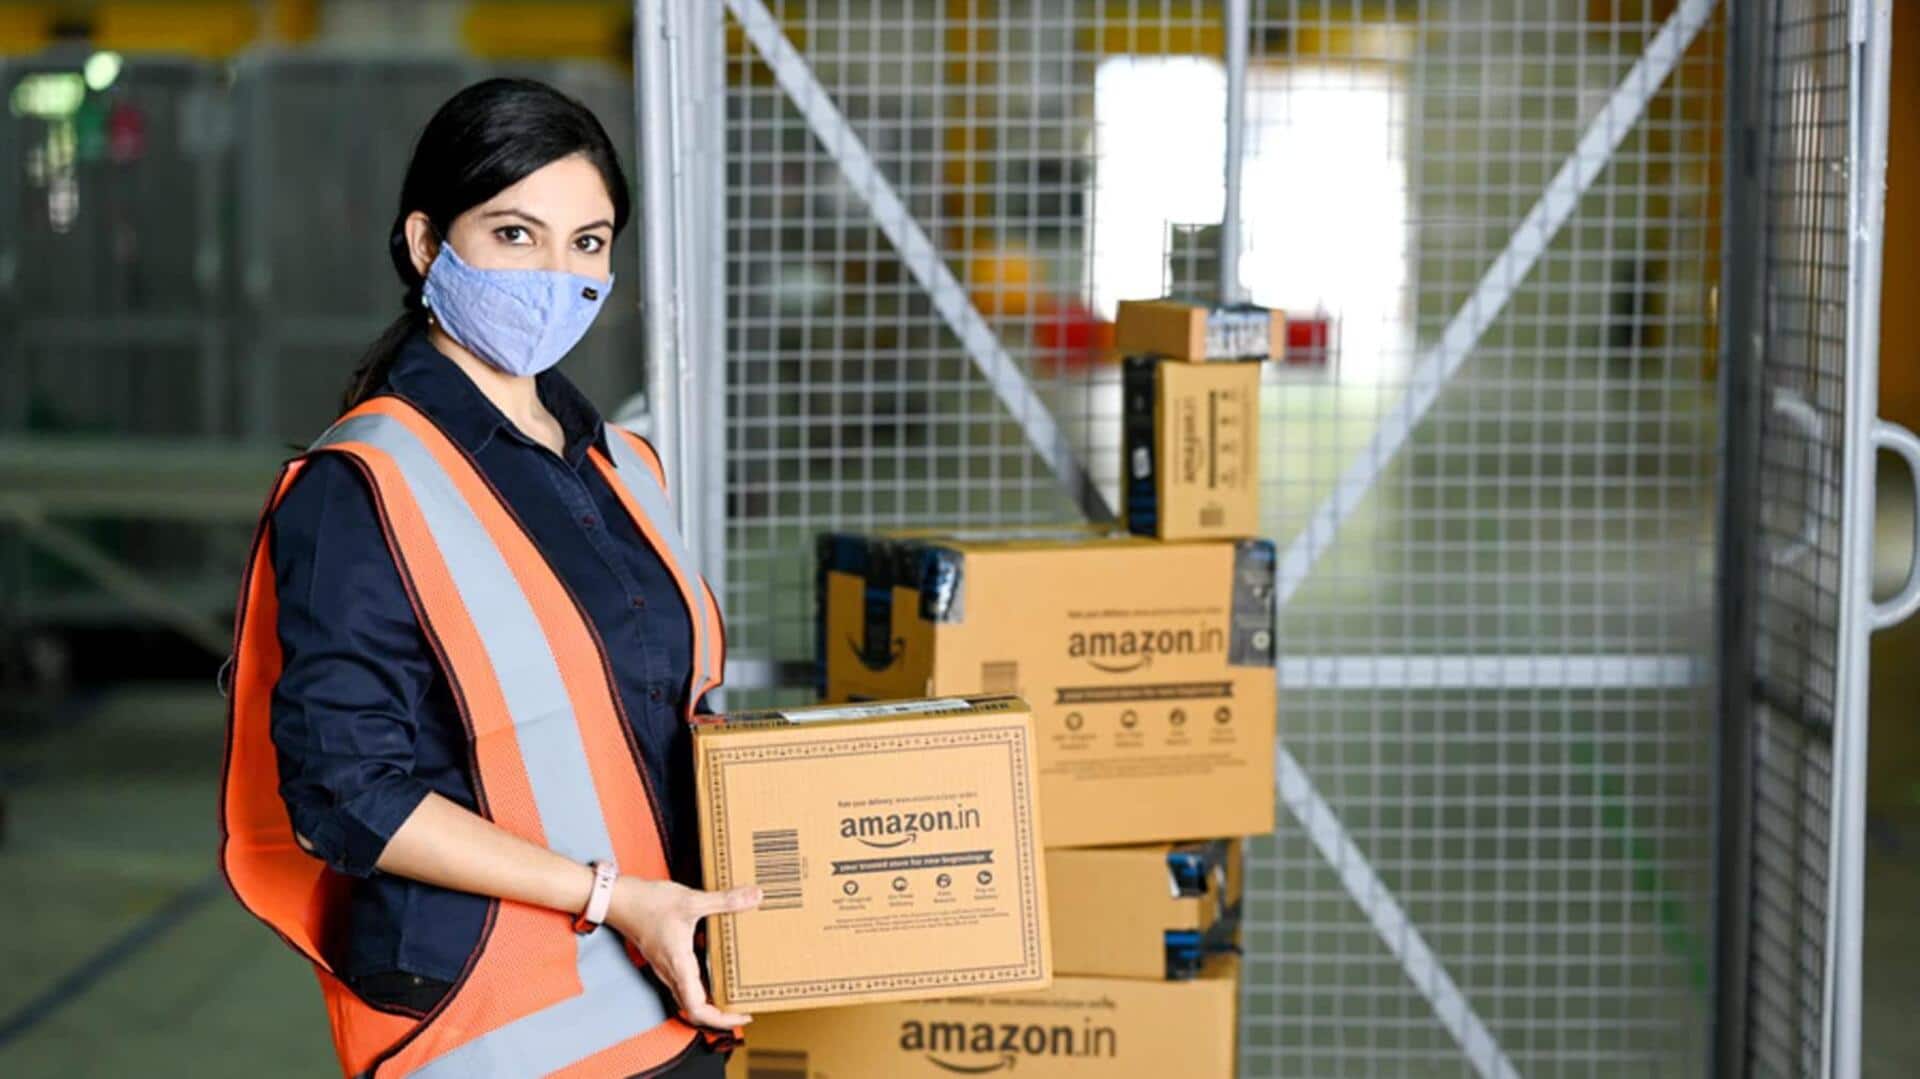 Amazon India's 'Bazaar' vertical to sell low-priced fashion, lifestyle products